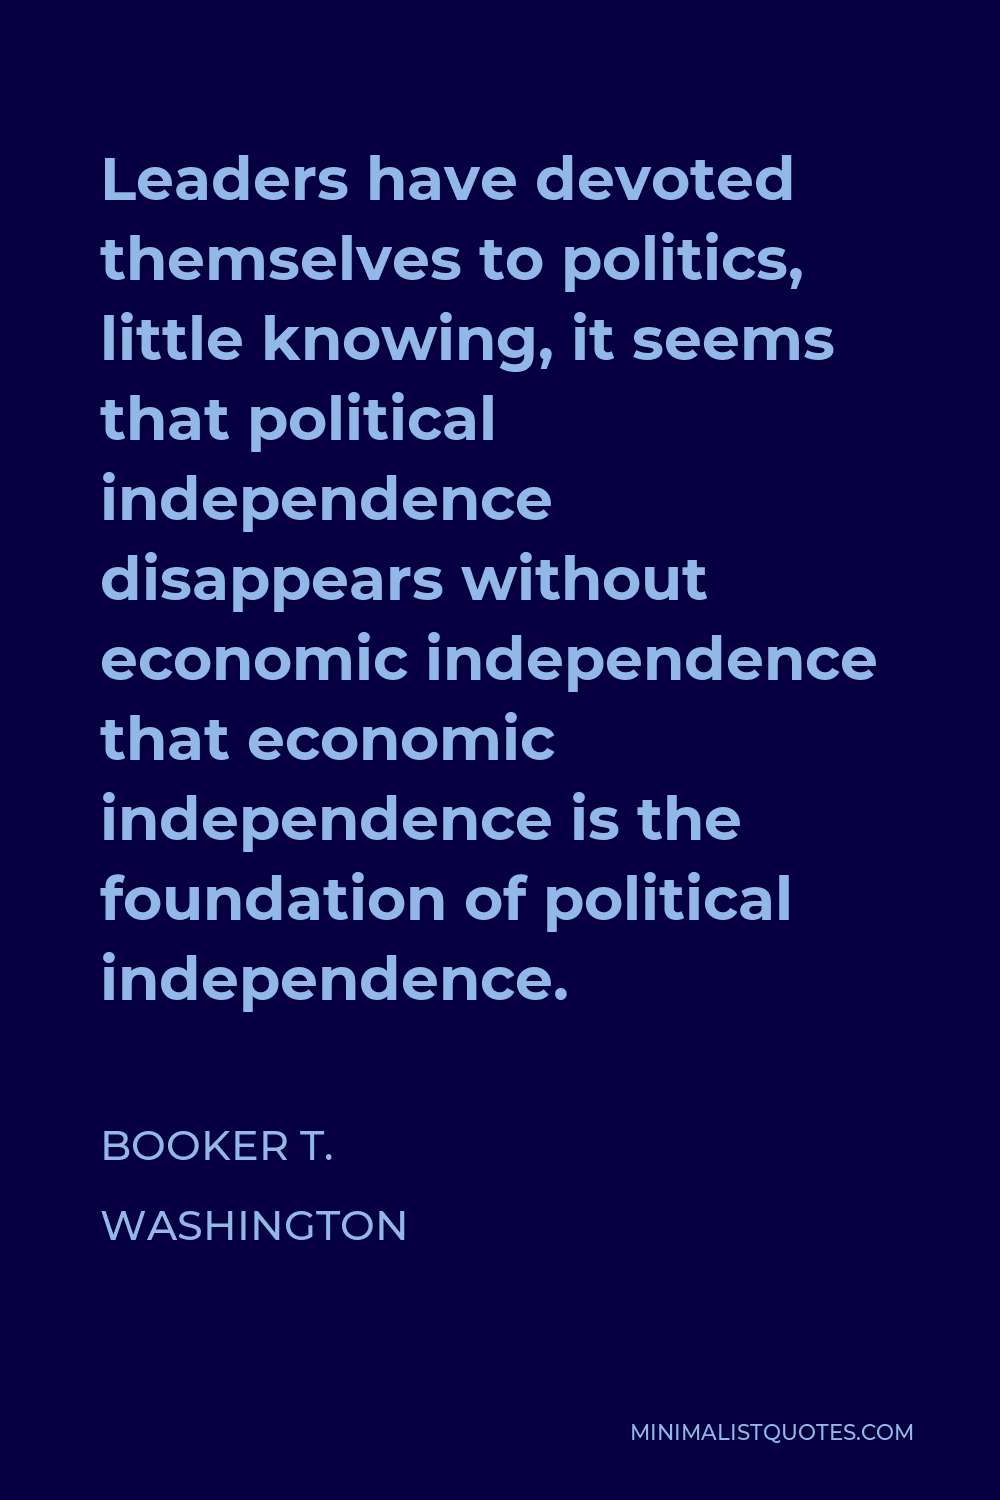 Booker T. Washington Quote - Leaders have devoted themselves to politics, little knowing, it seems that political independence disappears without economic independence that economic independence is the foundation of political independence.